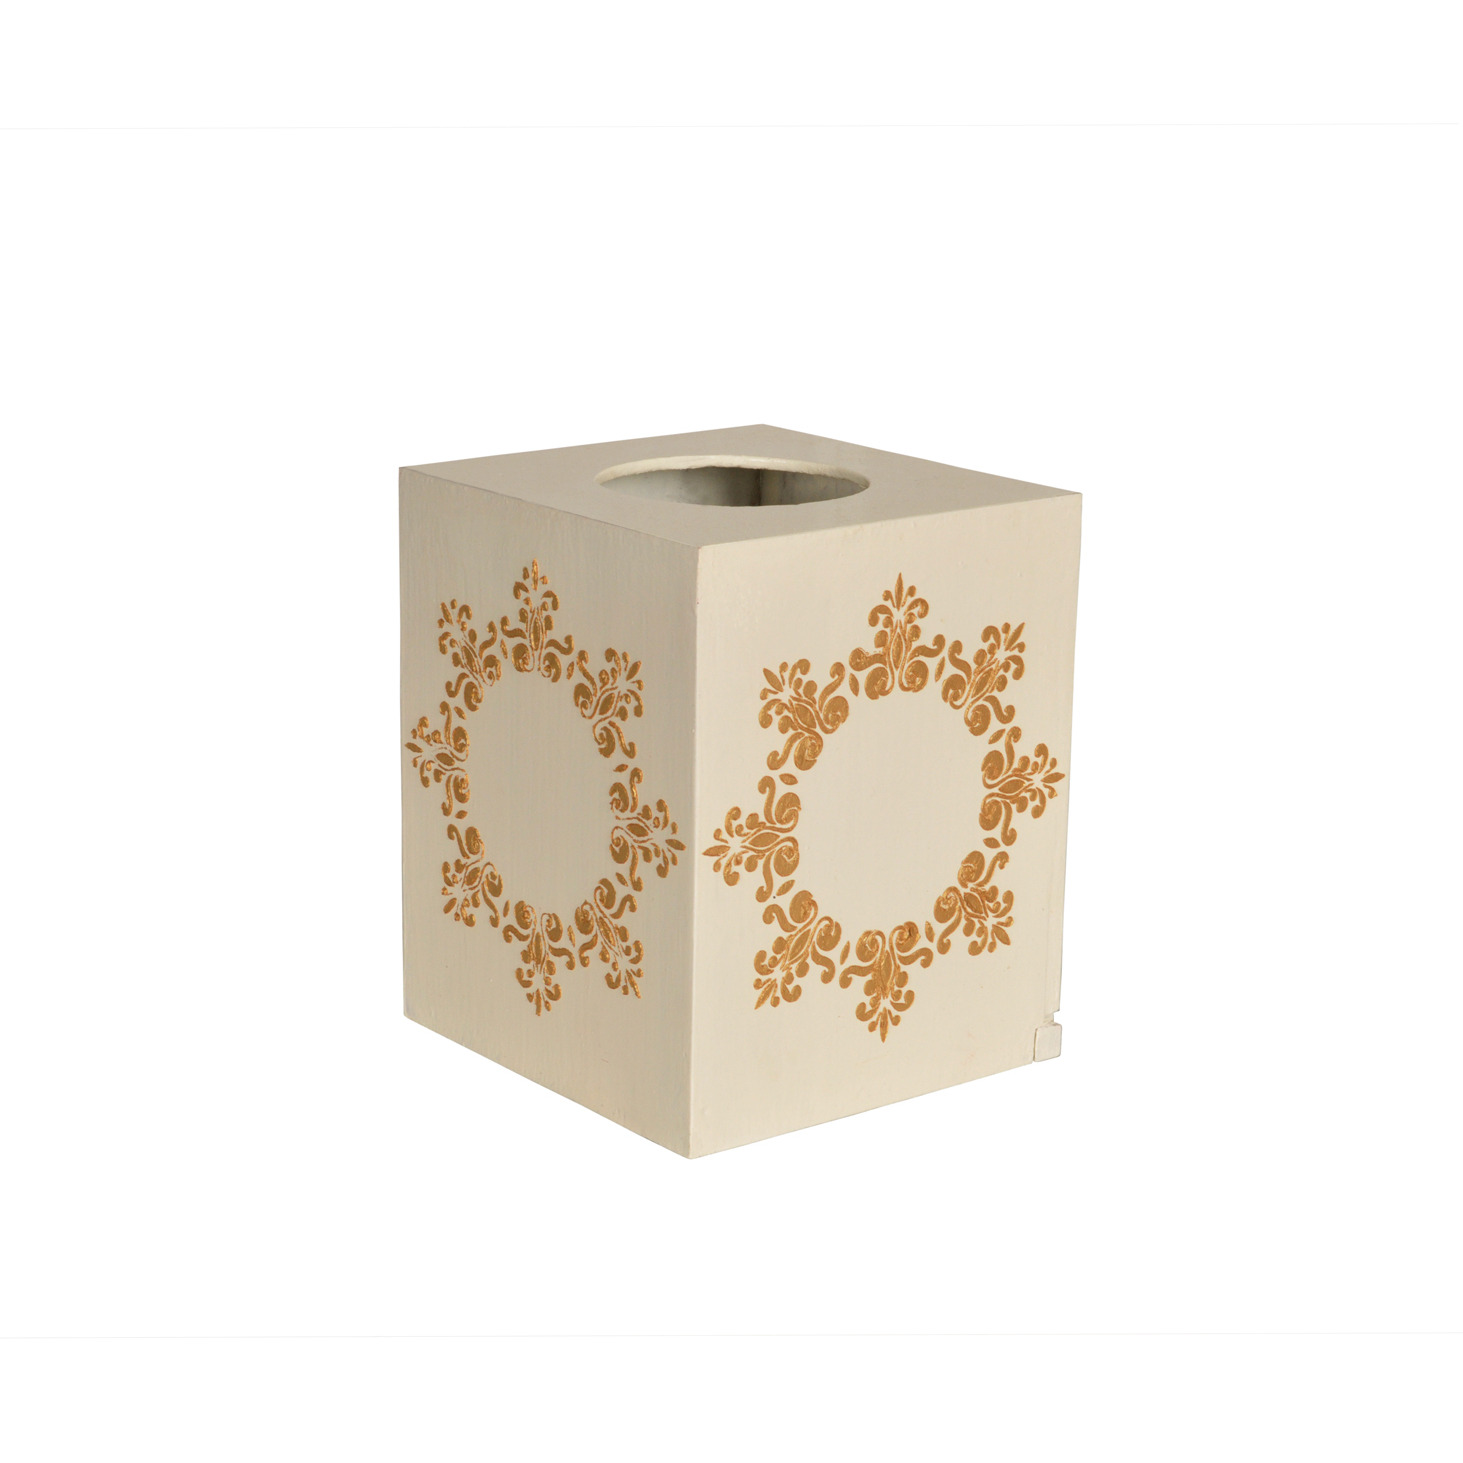 Home Oraginzer Wooden Makeup Room Dining Area Counter Top Decorative Handpainted Modern Design Tissue Dispensar Holder Stand Kitchen accessories items (5.5X5.5X7 Inch) (Size: 5.5X5.5X7, Color: Off-White)